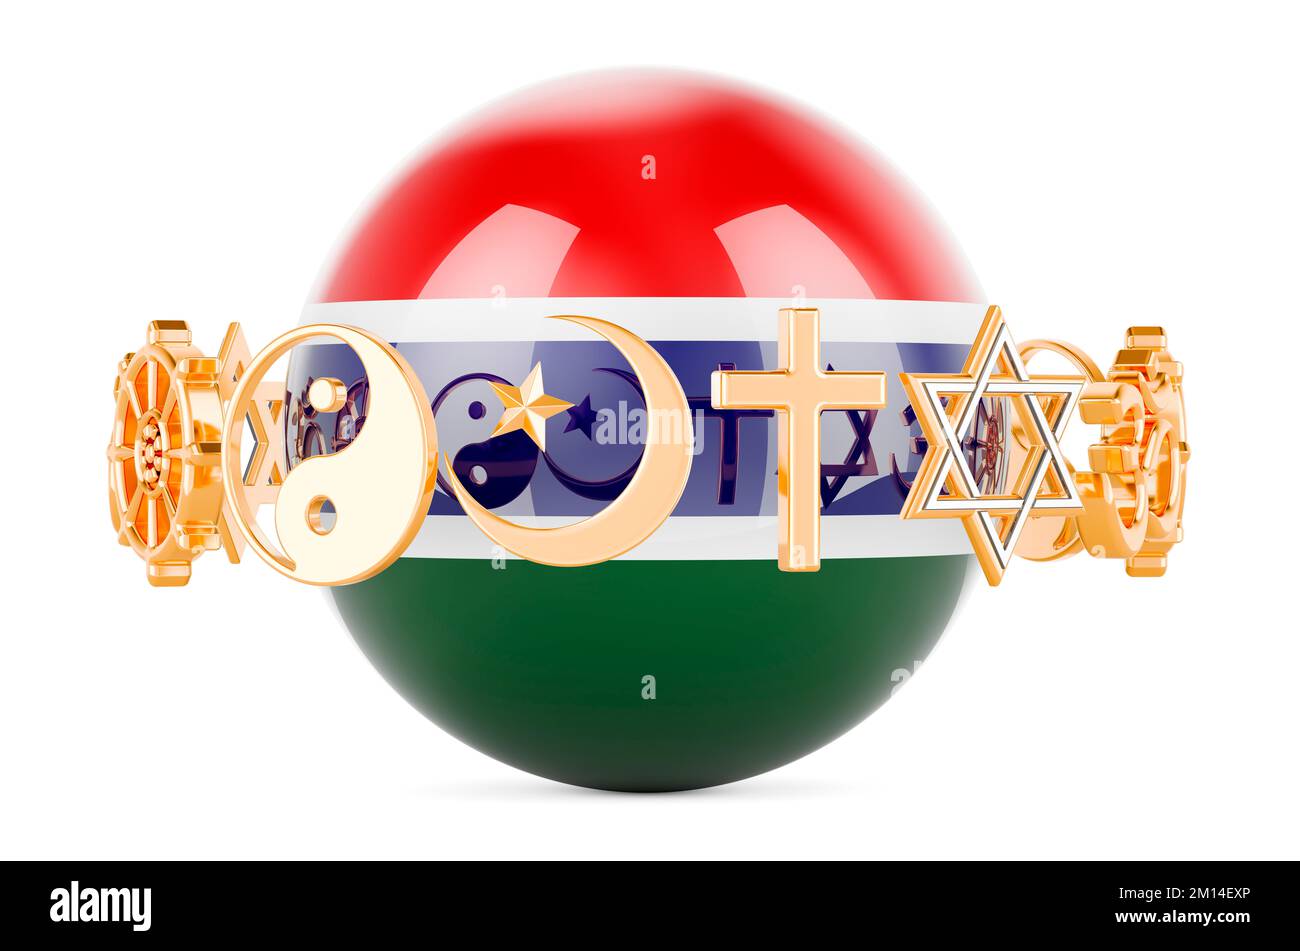 Gambia flag painted on sphere with religions symbols around, 3D rendering isolated on white background Stock Photo